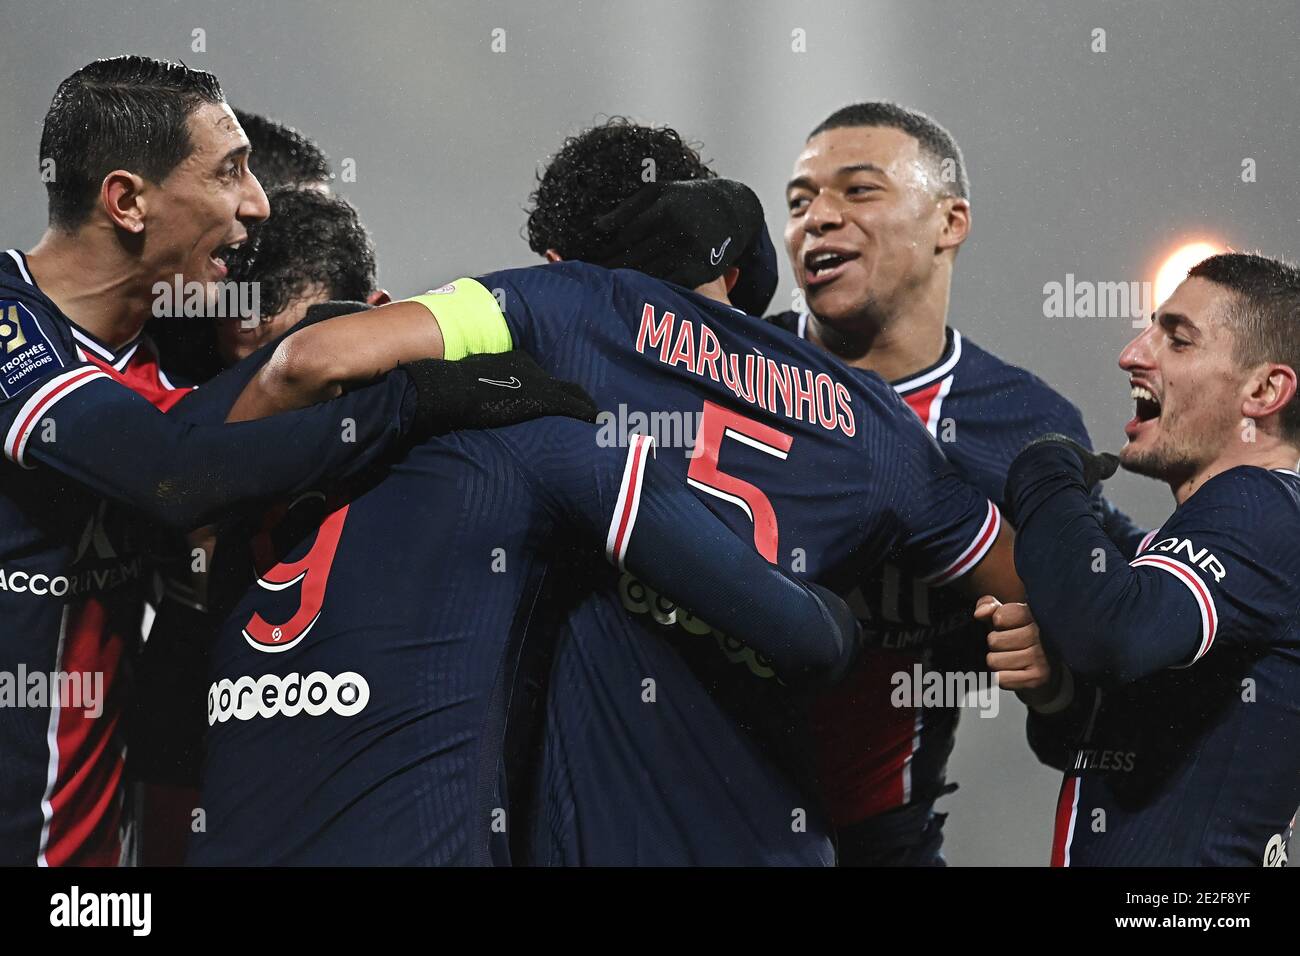 Lens. 14th Jan, 2021. Paris Saint-Germain's players celebrate during the  French Champions Trophy (Trophee des Champions) football match between  Paris Saint-Germain (PSG) and Marseille (OM) at the Bollaert-Delelis  Stadium in Lens, France,